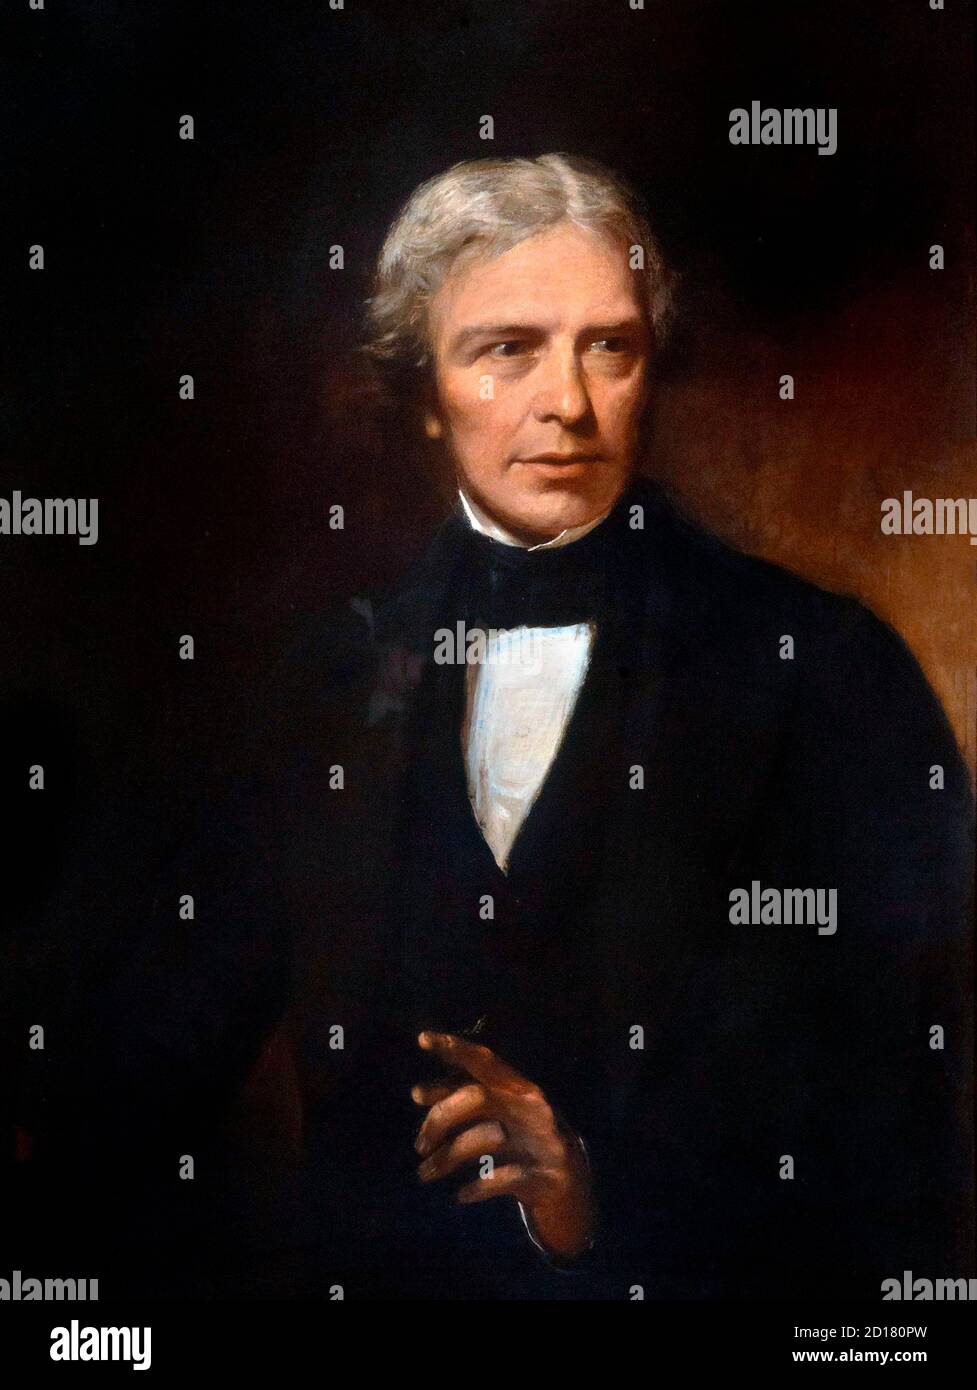 Michael Faraday (1791-1867), portrait by Alexander Blaikley (1816-1903), oil on canvas, 1840s. Faraday was an English scientist who contributed to the study of electromagnetism and electrochemistry. Stock Photo